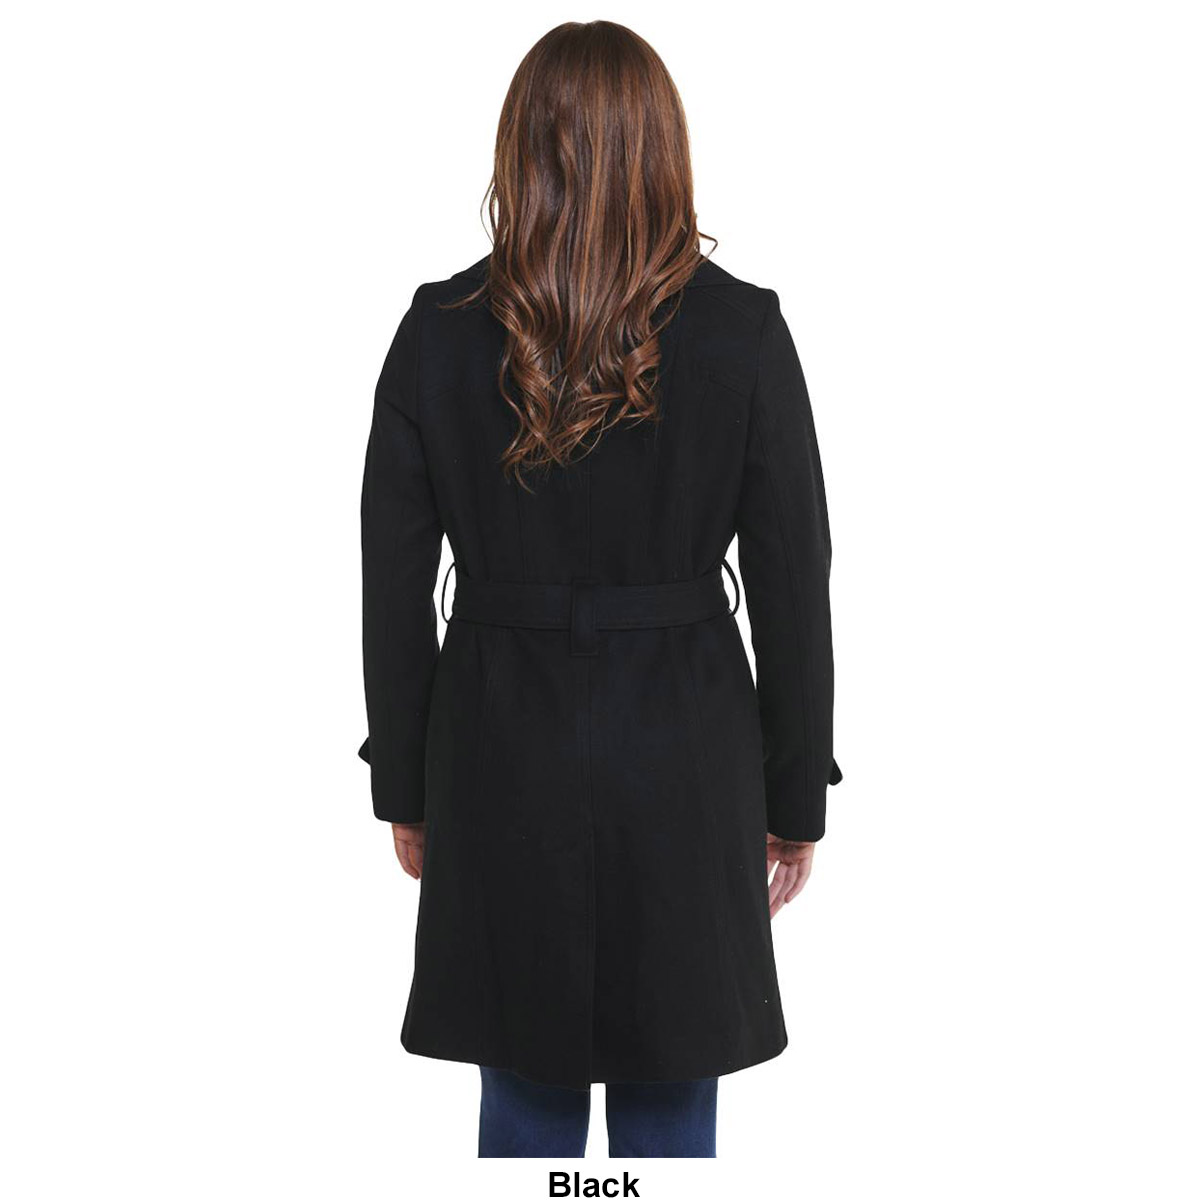 Plus Size Michael Kors Single Breasted Belted Wool Coat